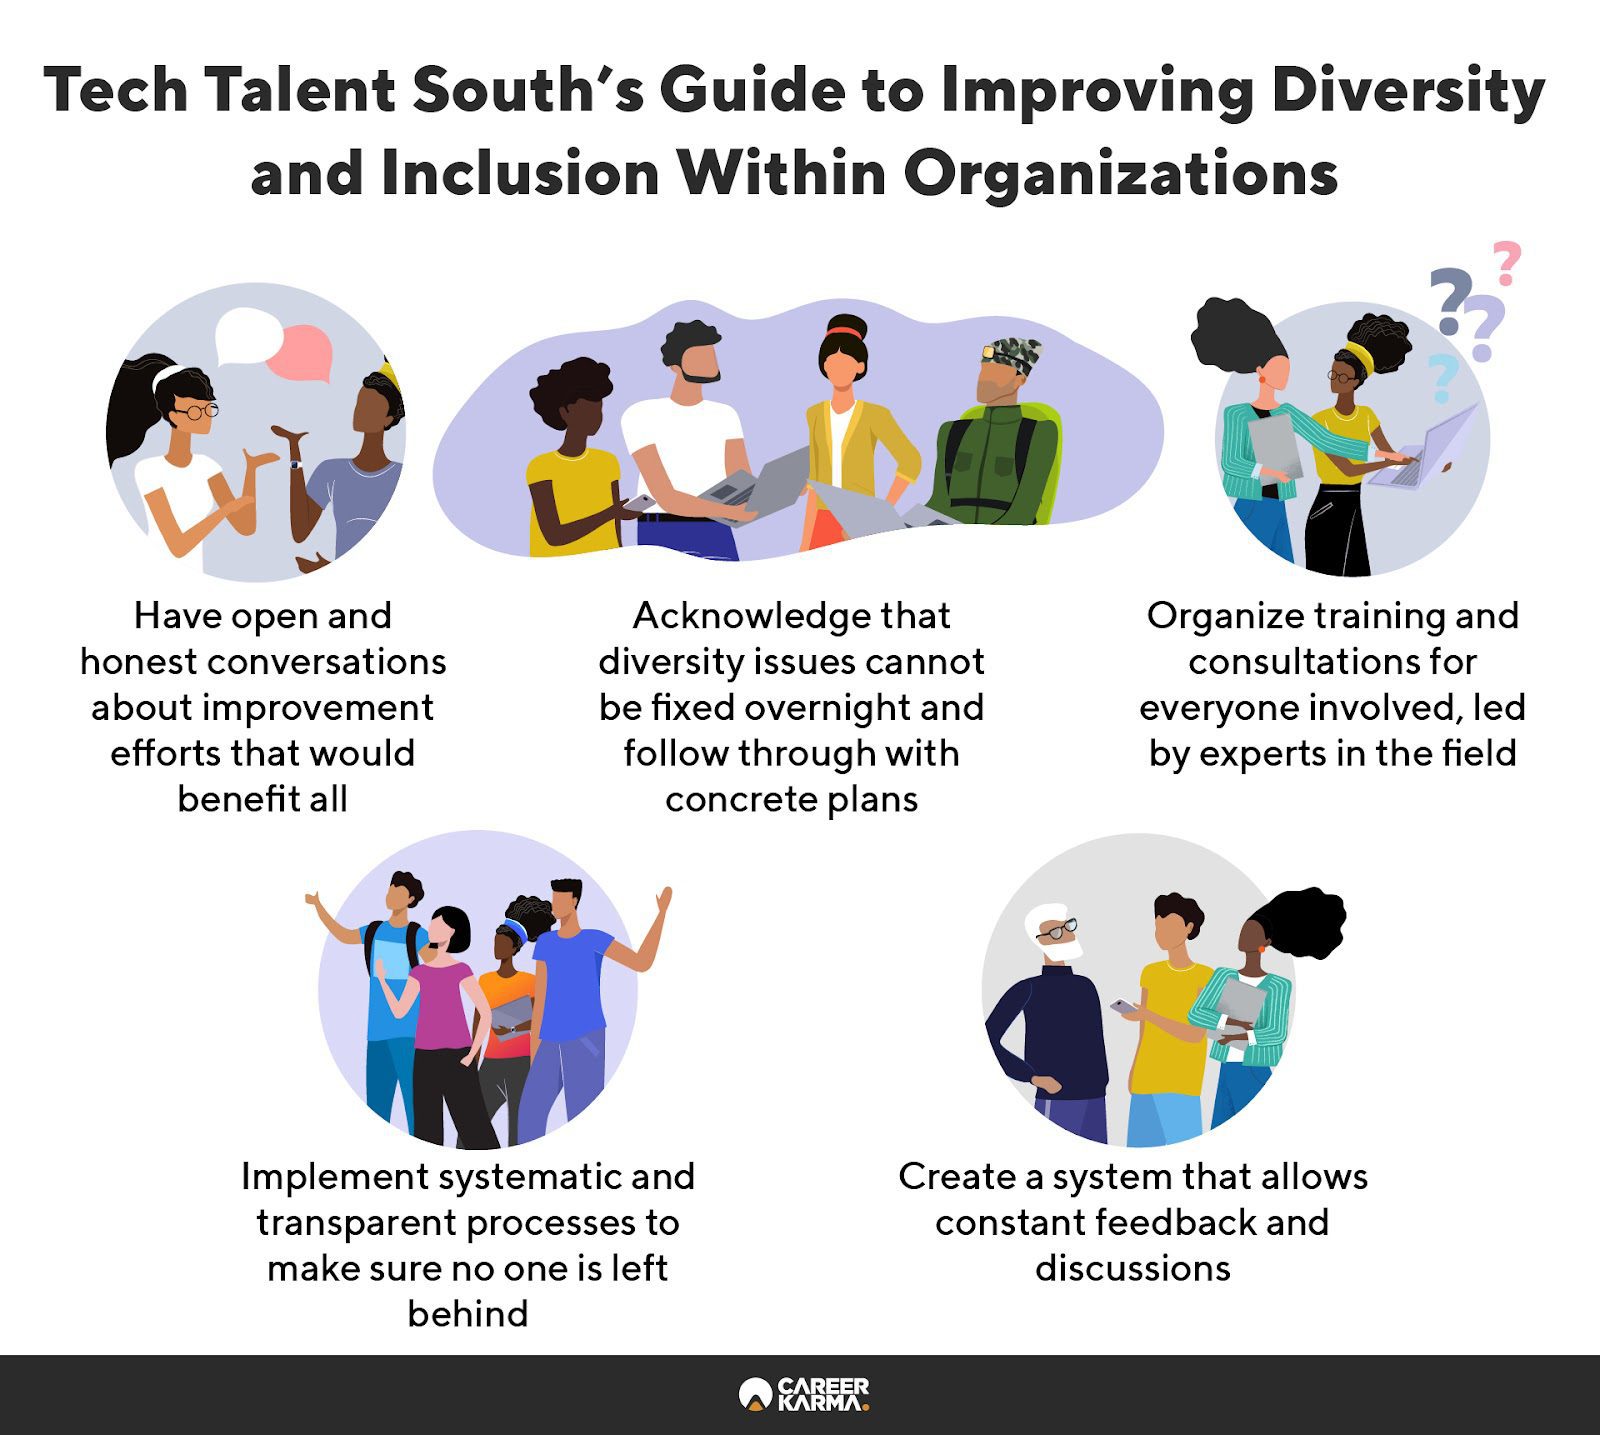 An infographic featuring Tech Talent South’s guide to improving diversity and inclusion within organizations